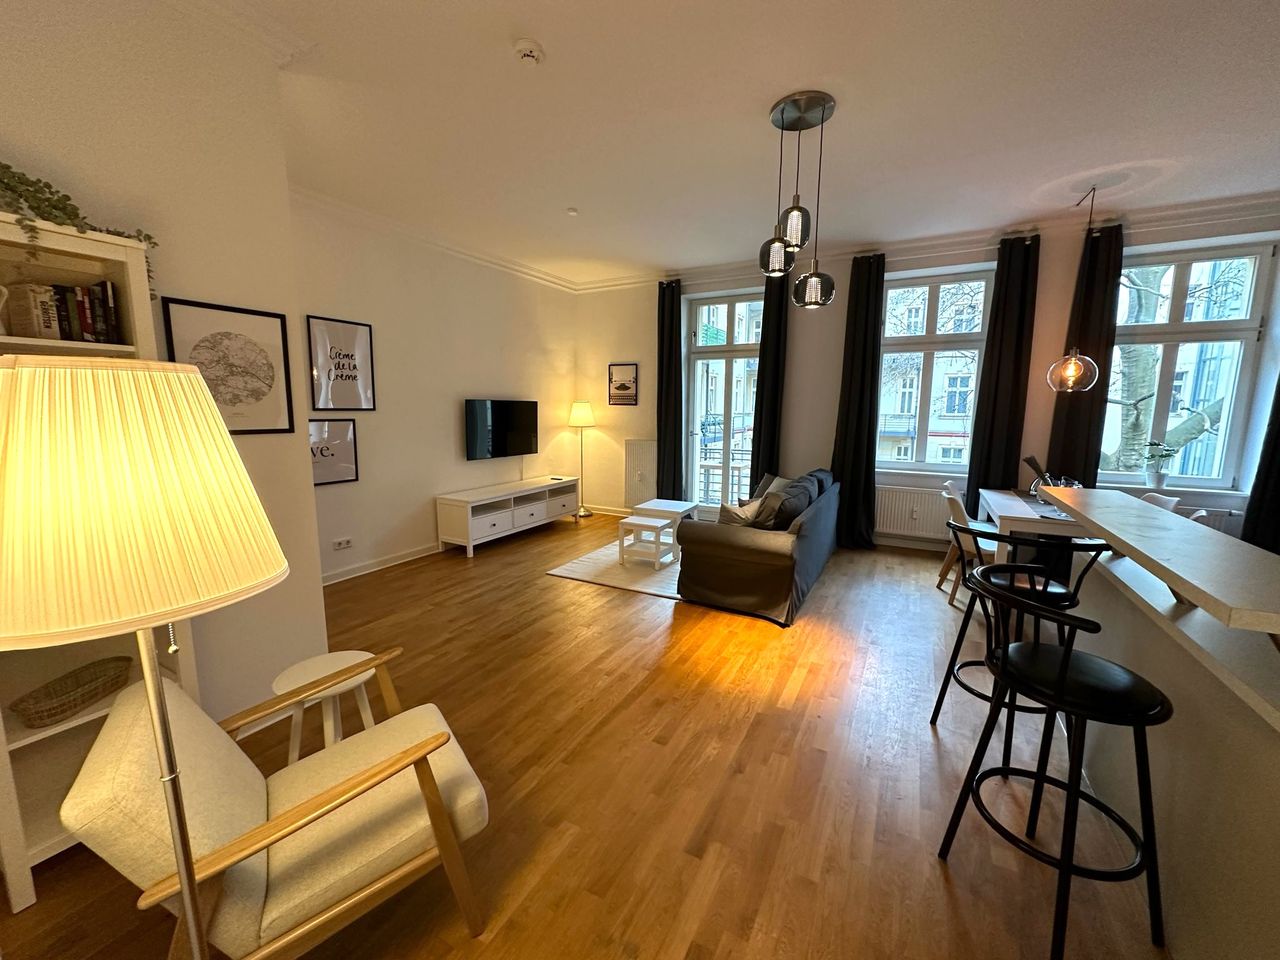 High-quality furnished apartment with elevator in the quiet inner courtyard on Warschauer Str.